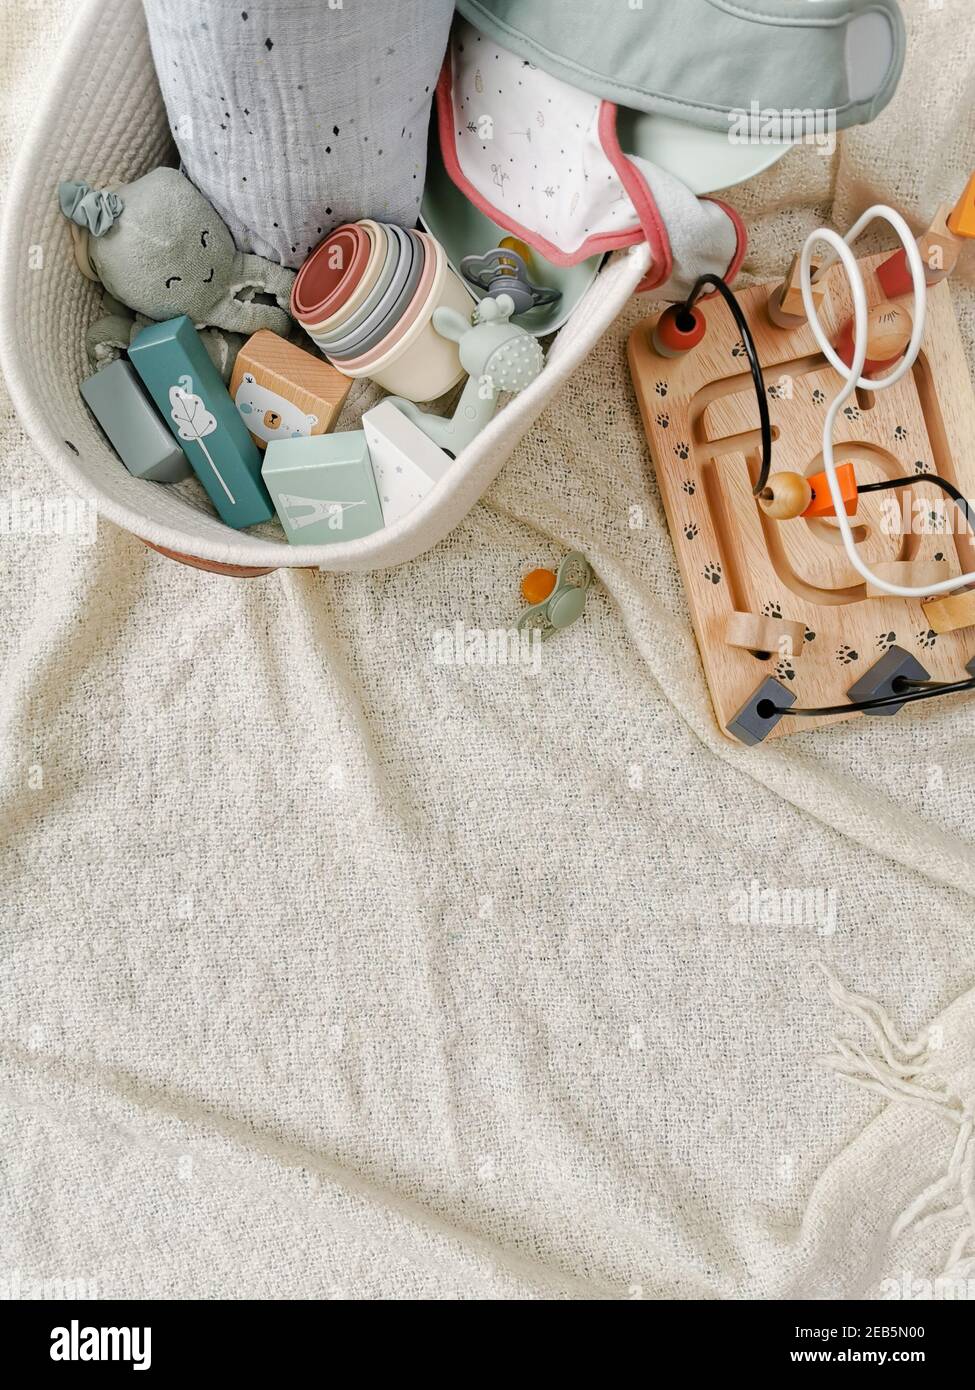 Gender-neutral toys for babies in soft colors. Wooden blocks, beads toy, pacifier, ... Gender neutral parenting. Flat lay. Stock Photo